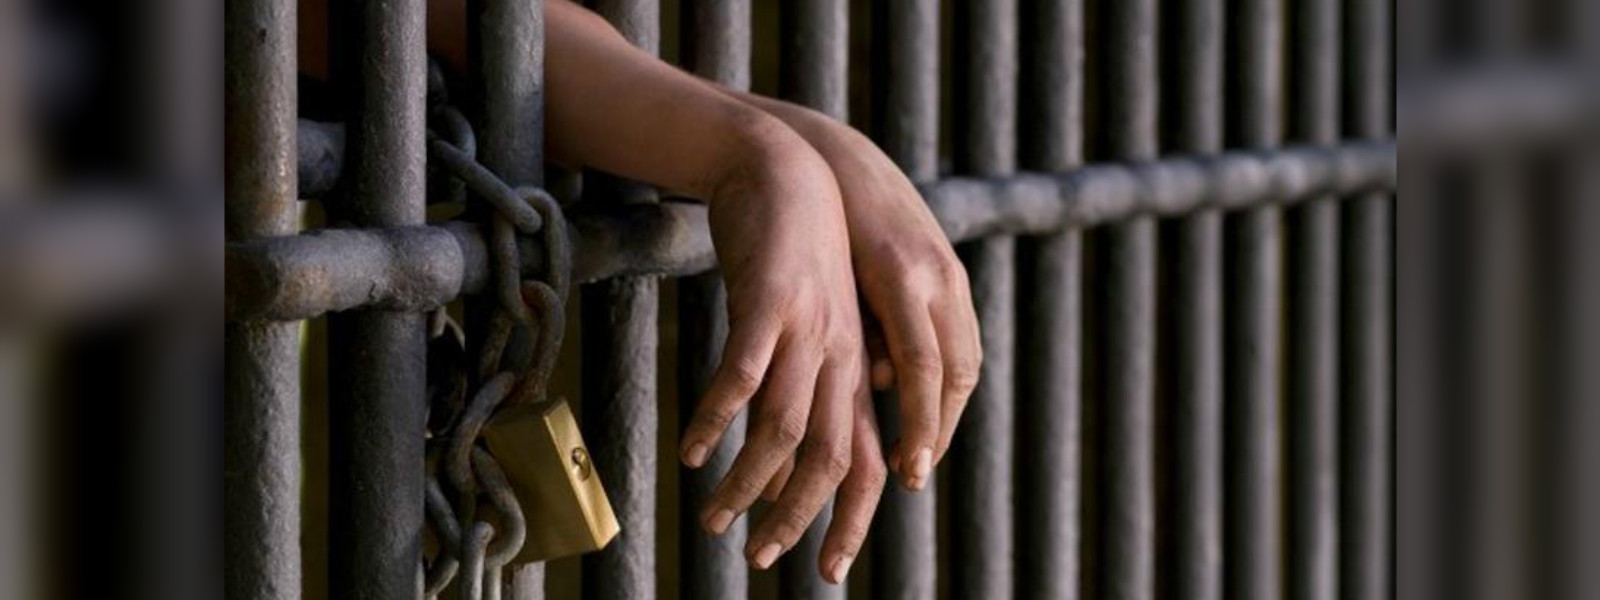 Over 1200 in remand to be released on bail